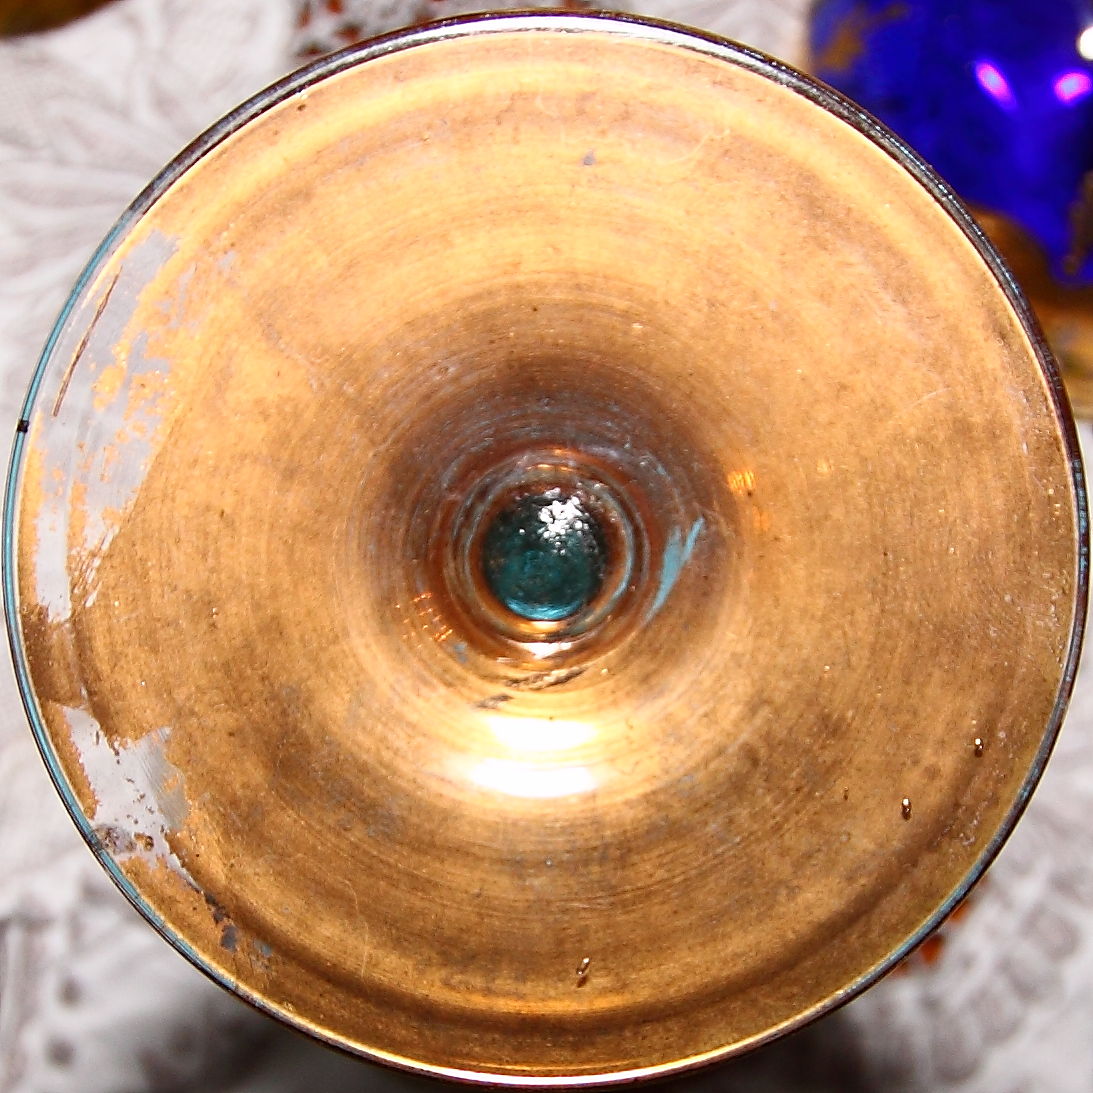 gold plate with blue glass bowl inside of it